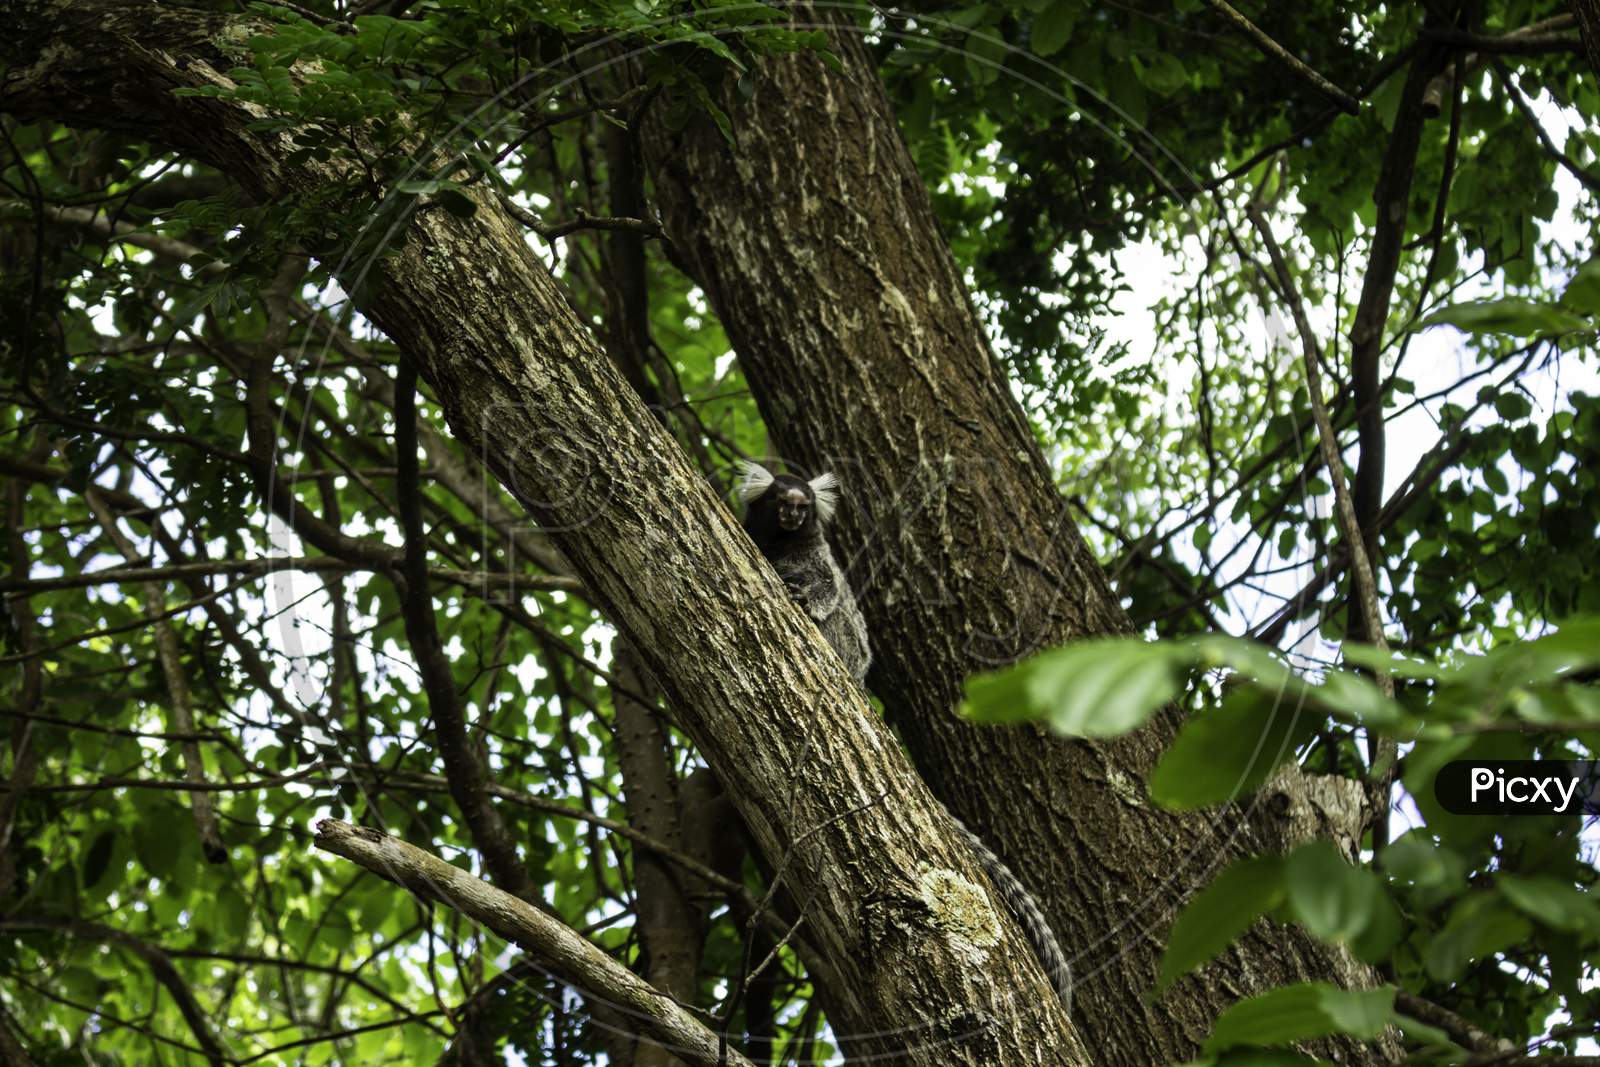 Little Monkey In A Tree. Wild Animal In Its Natural Habitat.